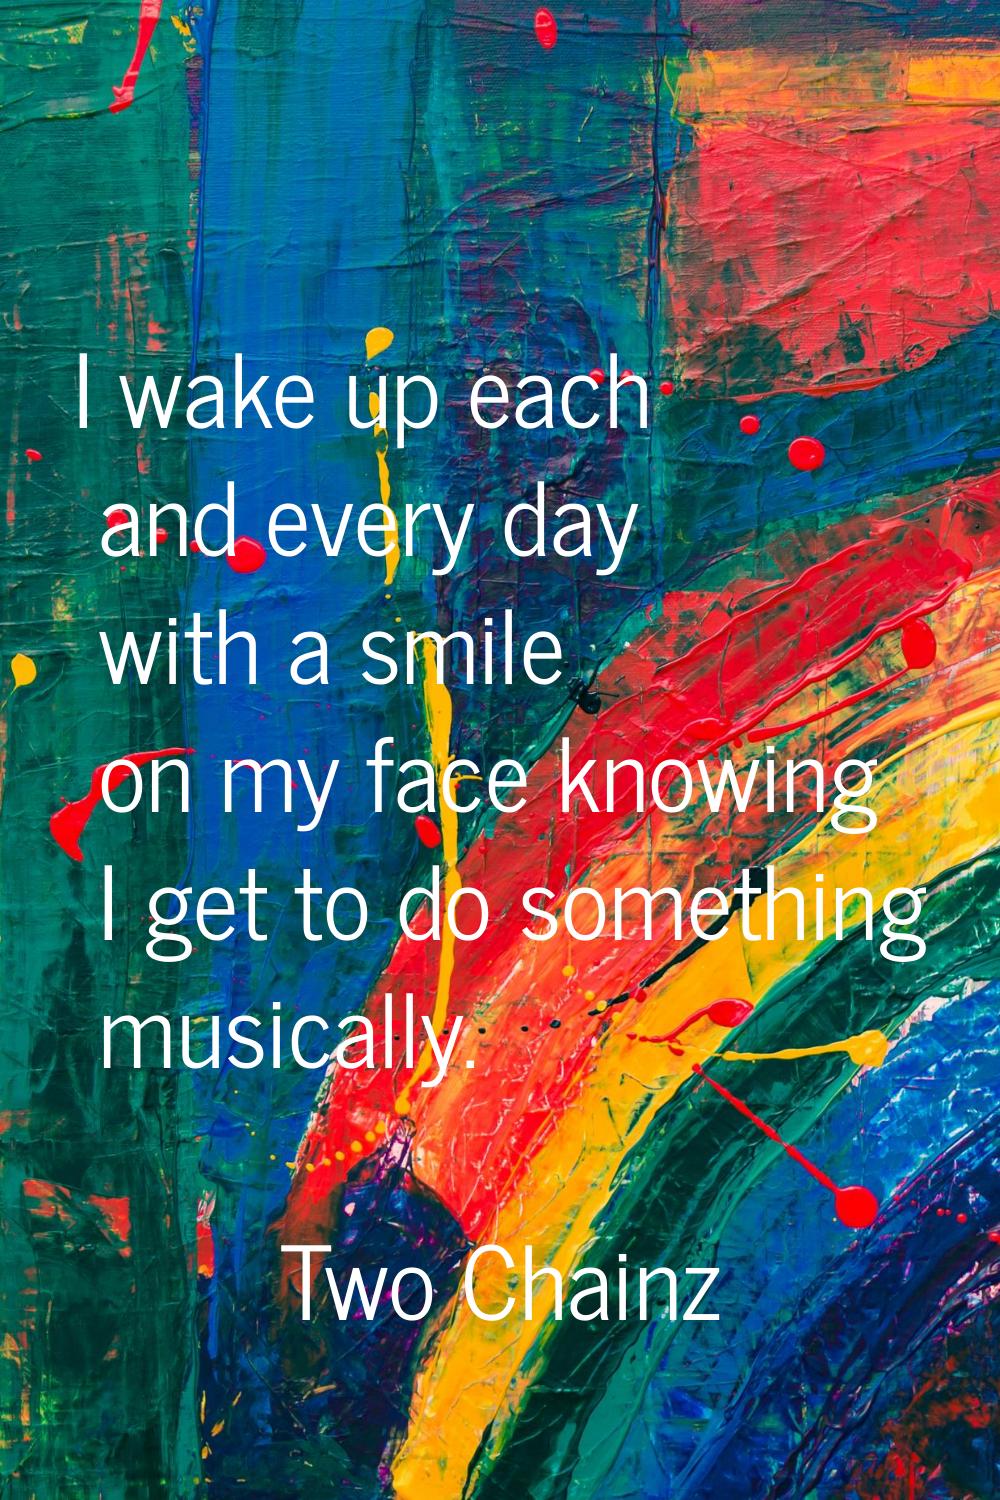 I wake up each and every day with a smile on my face knowing I get to do something musically.